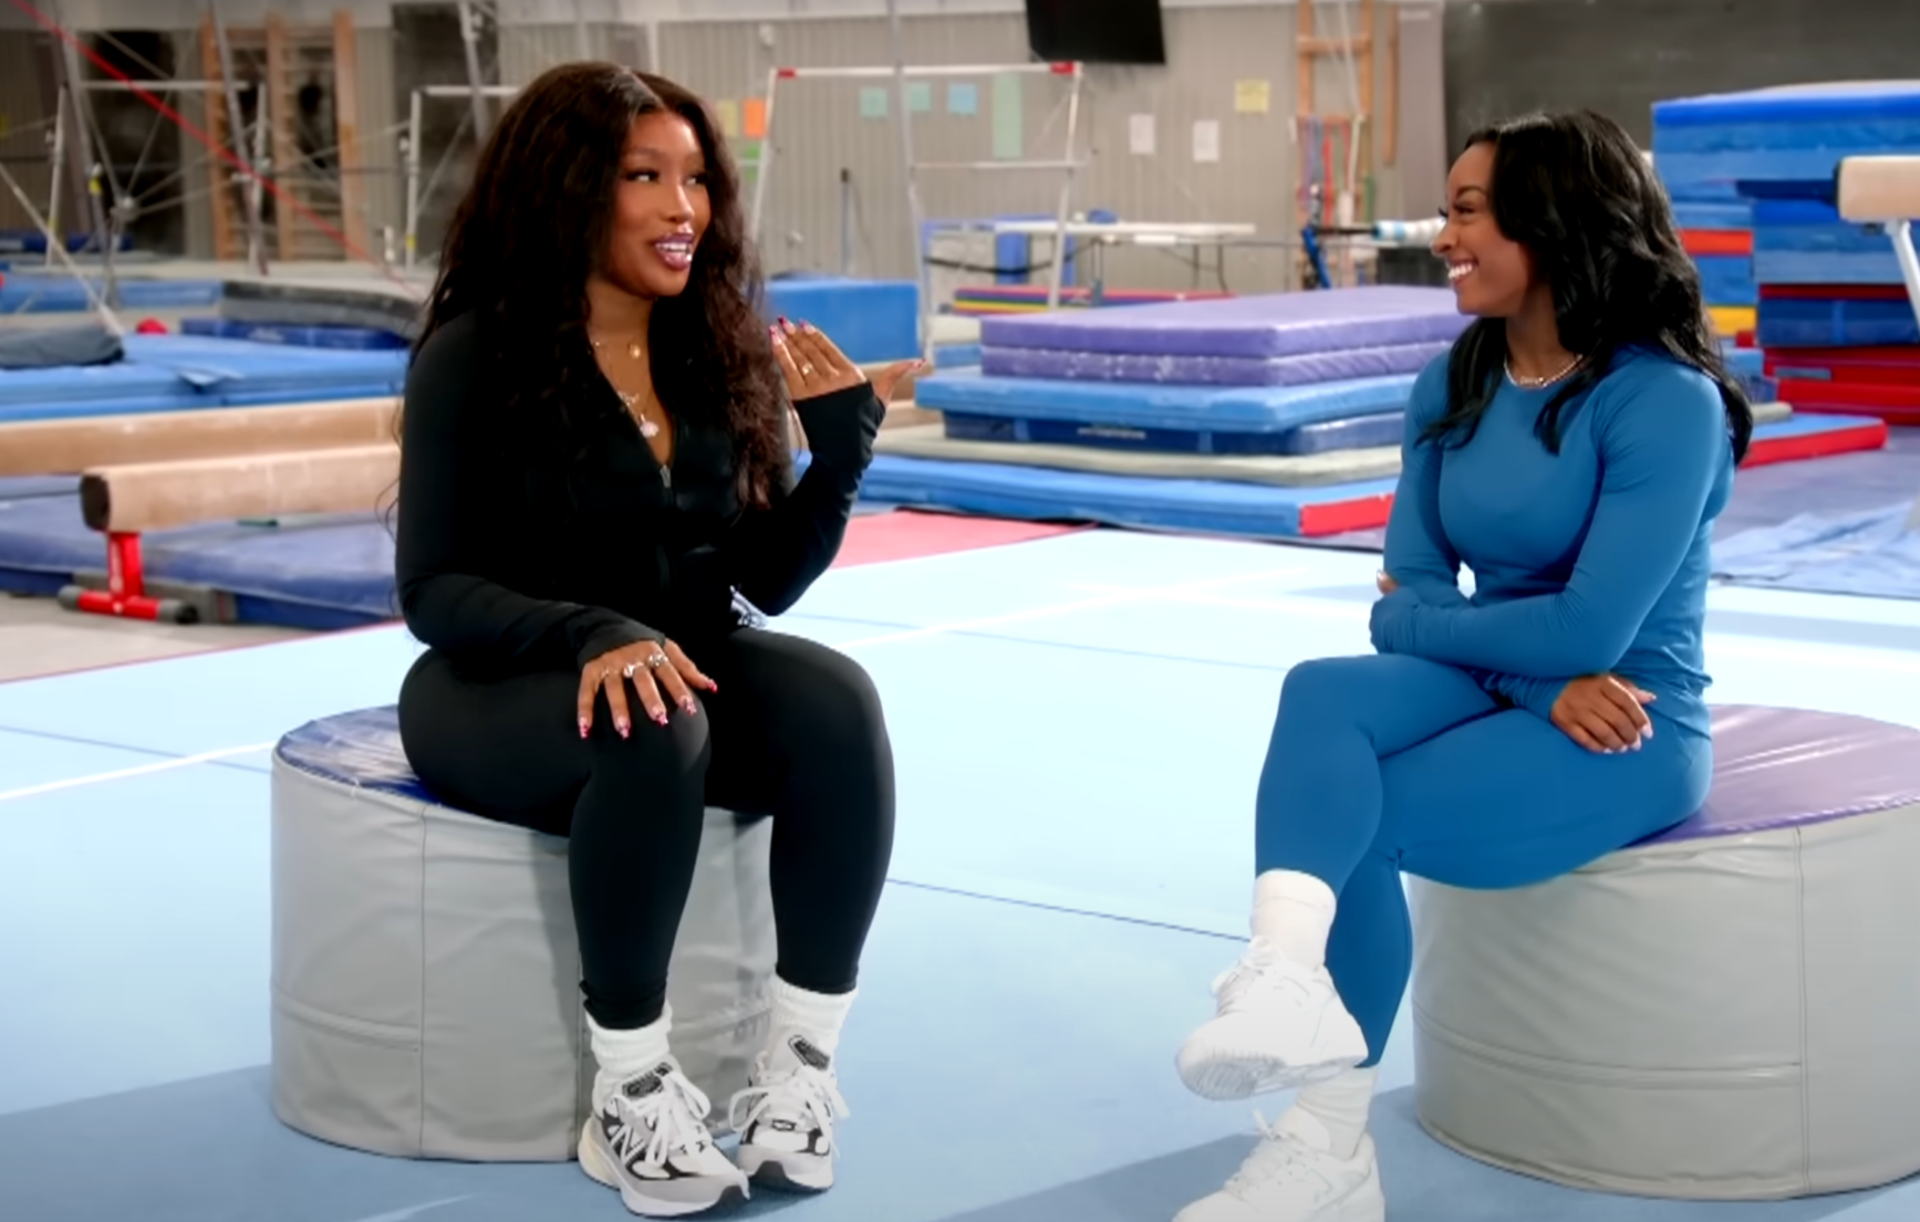 Leading up to the 2024 Olympics, SZA challenges Simone Biles to a handstand competition and shares about her past as a gymnast.